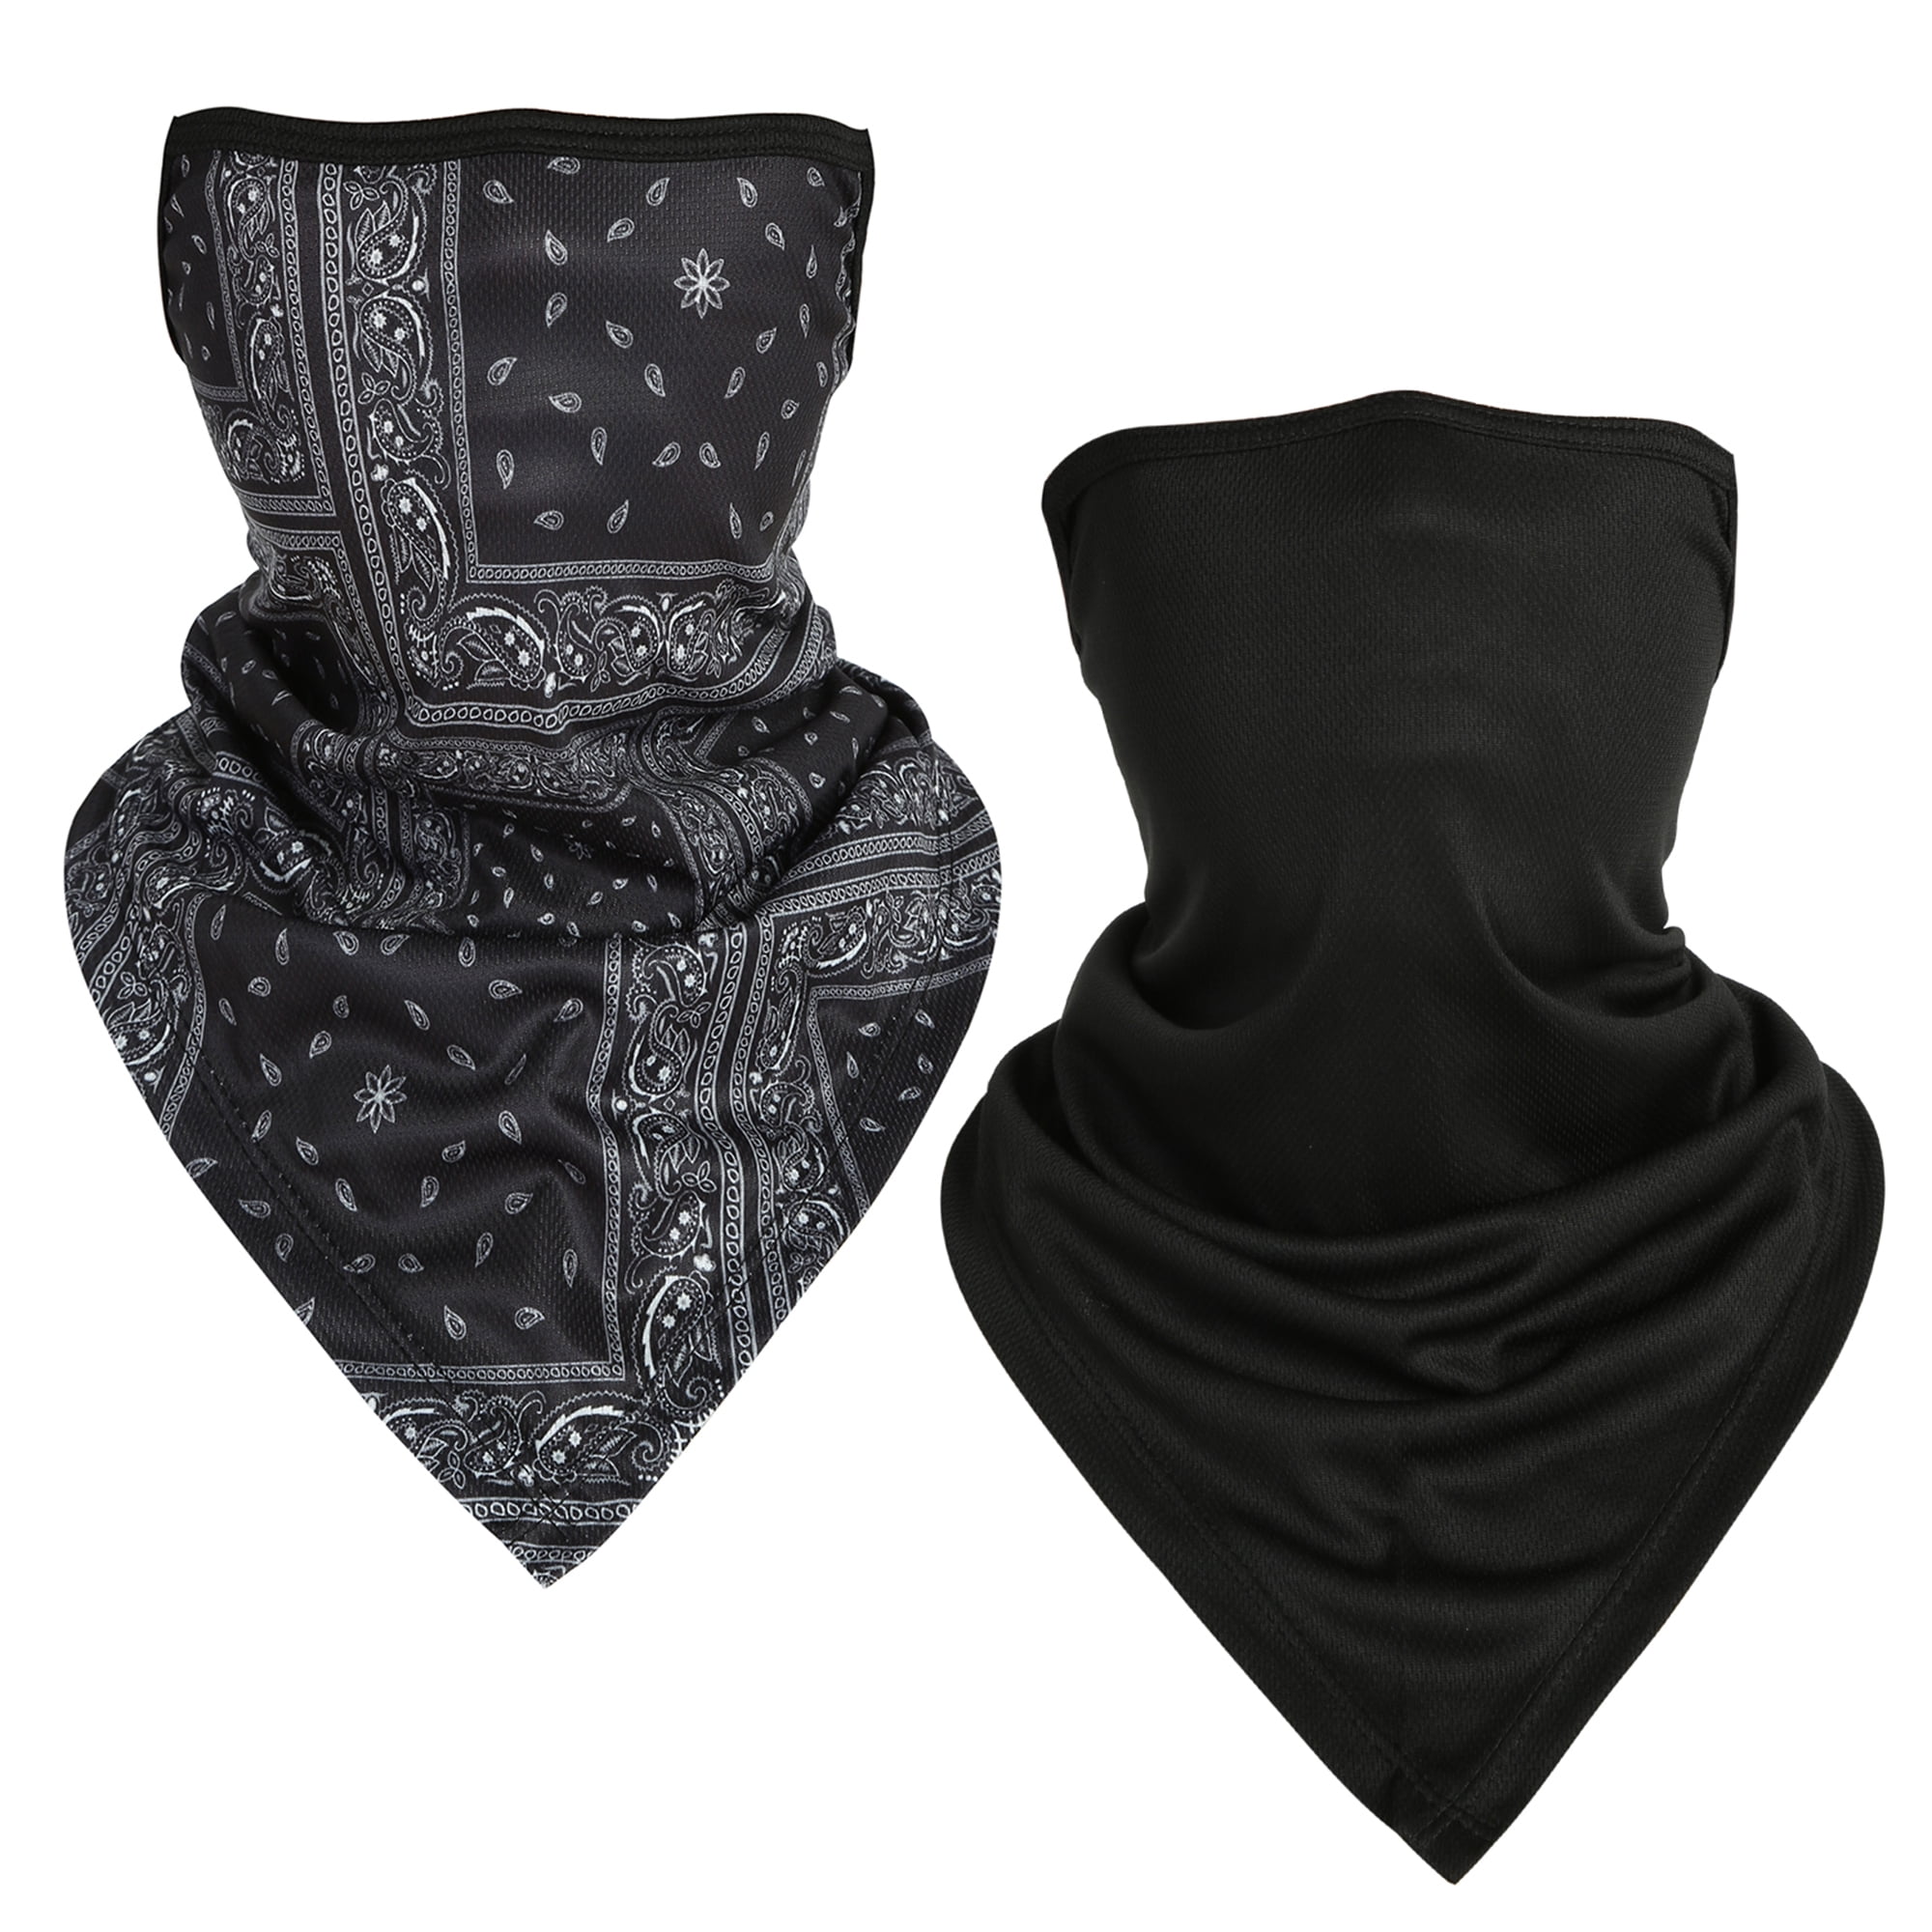 2 pcs Neck Gaiter Windproof Face Cover Scarf Sunscreen Bandana for Sport Outdoor 